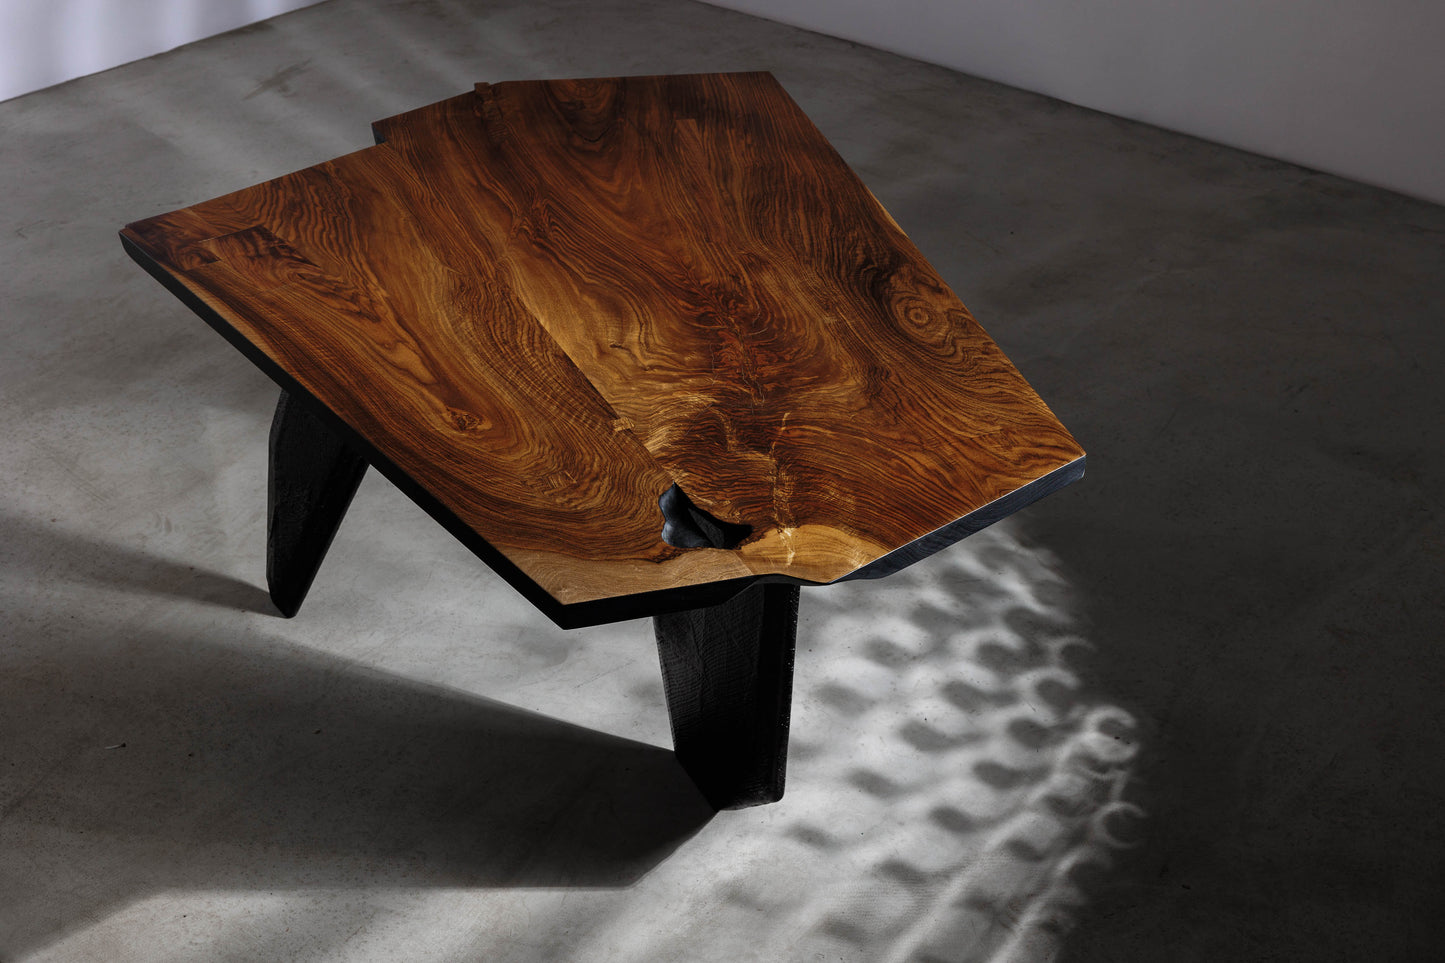 EM206 Of 18Brut Collection | Walnut Dining Table for 6 | Main Image showing the whole table 